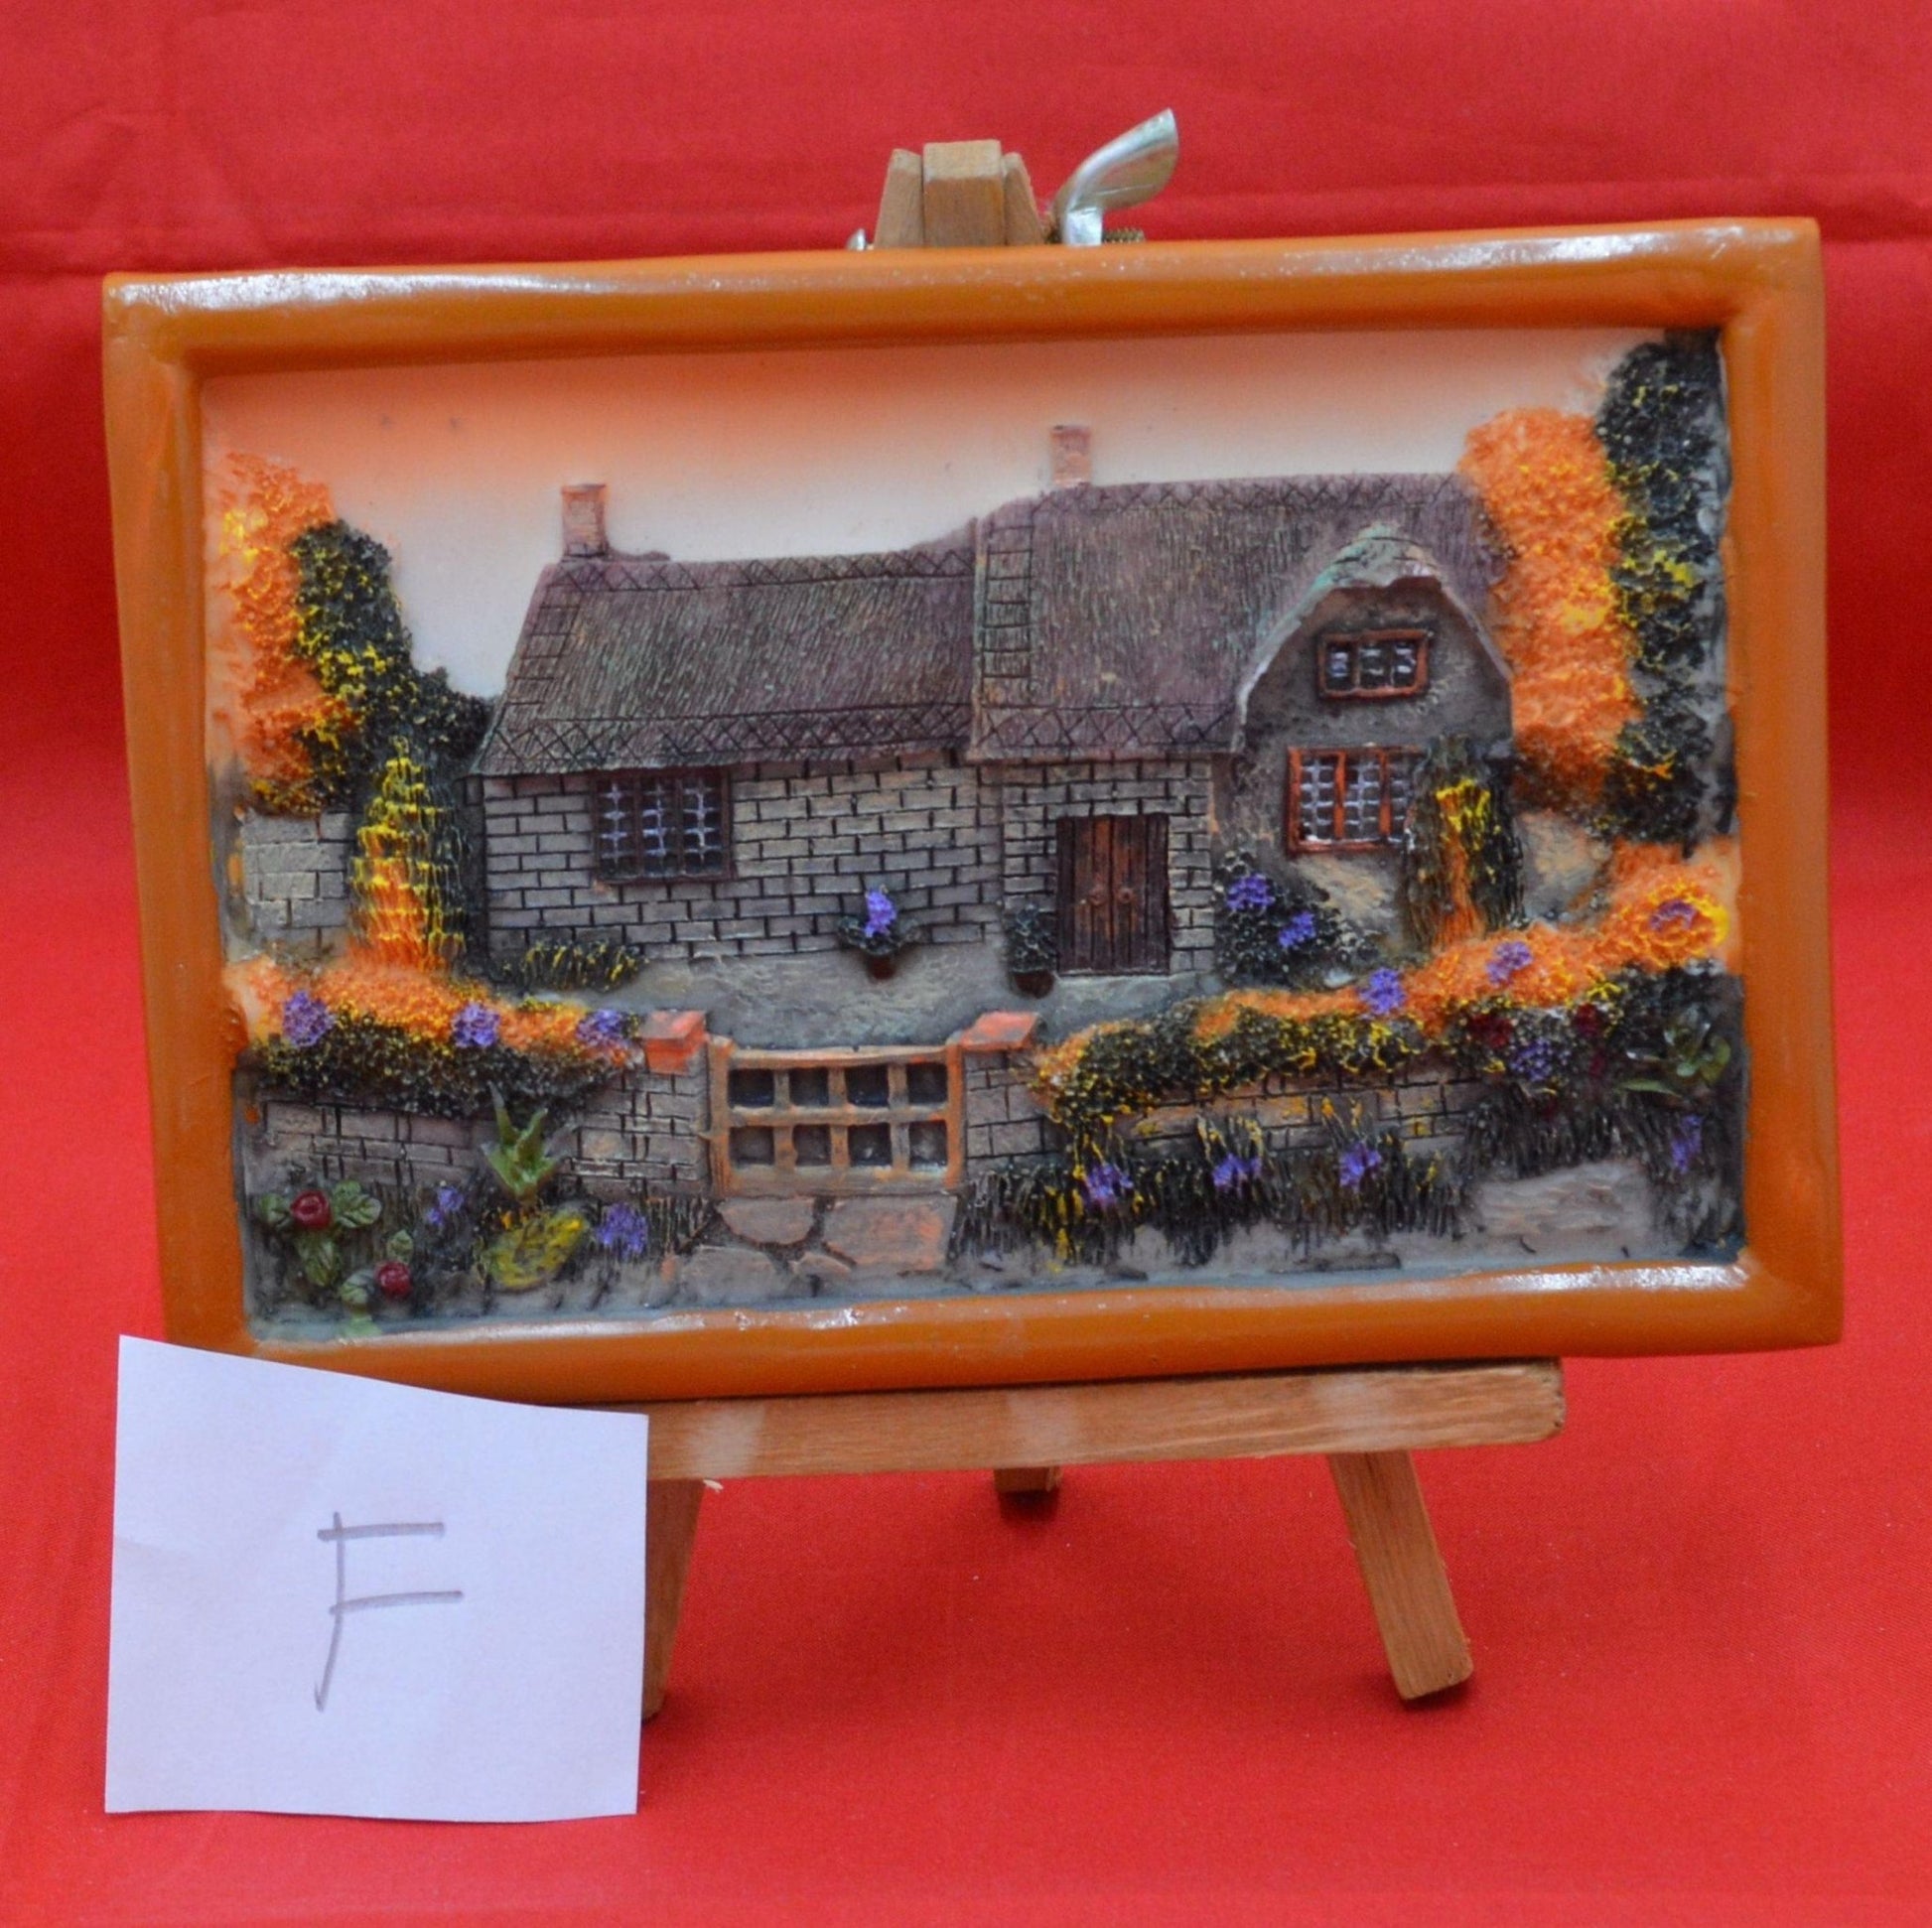 DECORATIVE ORNAMENT SCENIC RESIN PICTURE ON AN EASEL (PREVIOUSLY OWNED) GOOD CONDITION - TMD167207